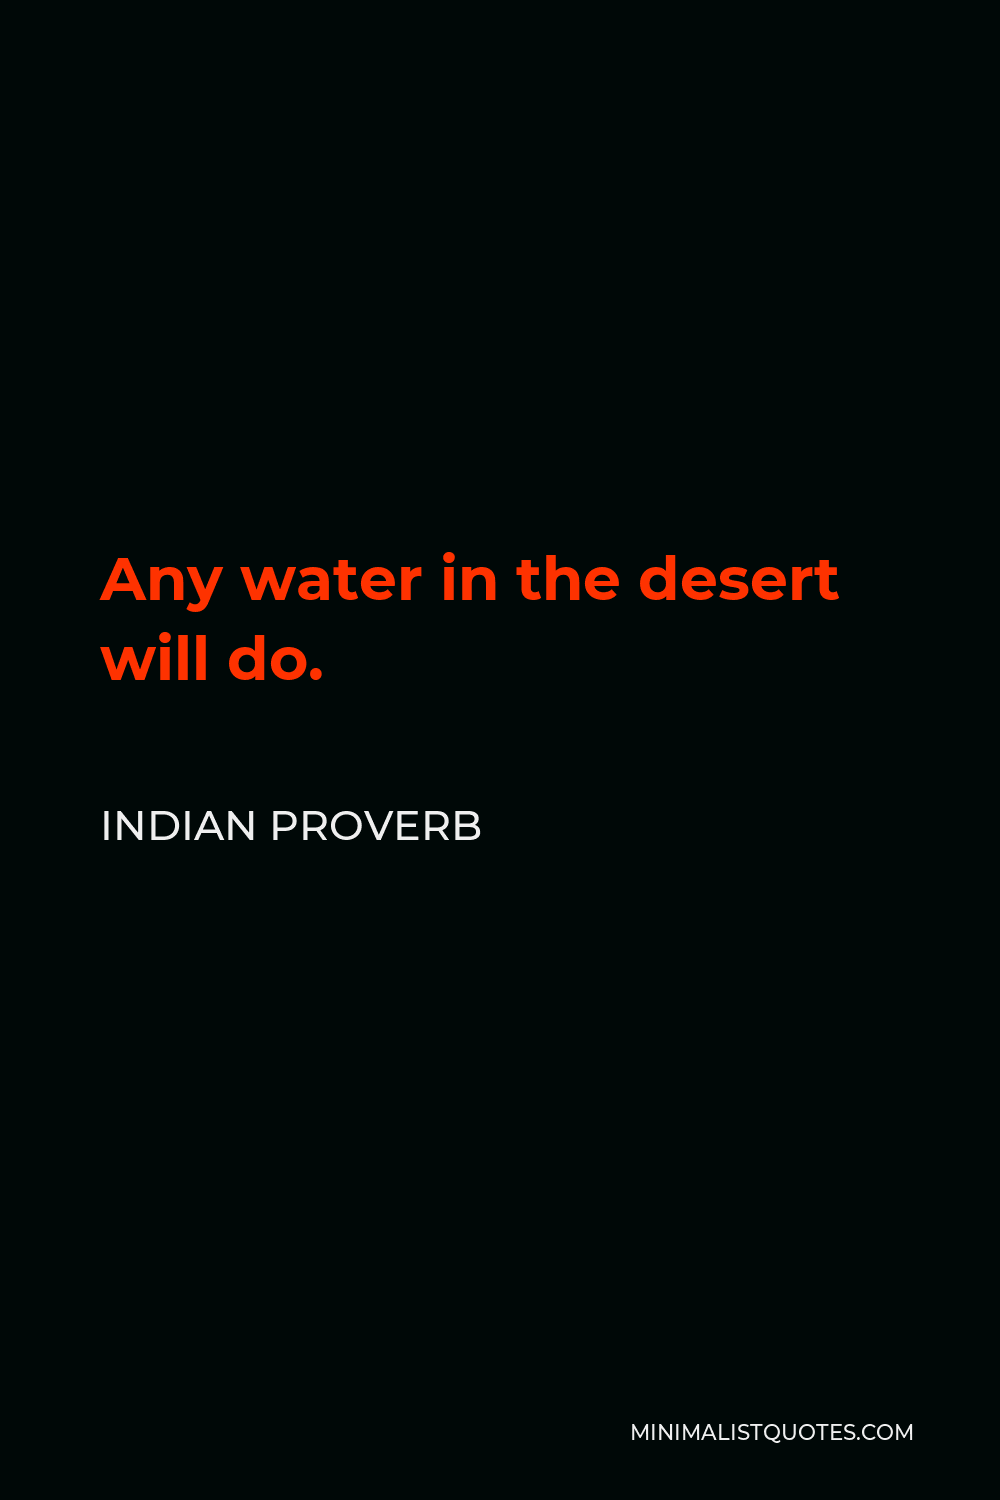 Indian Proverb Quote - Any water in the desert will do.